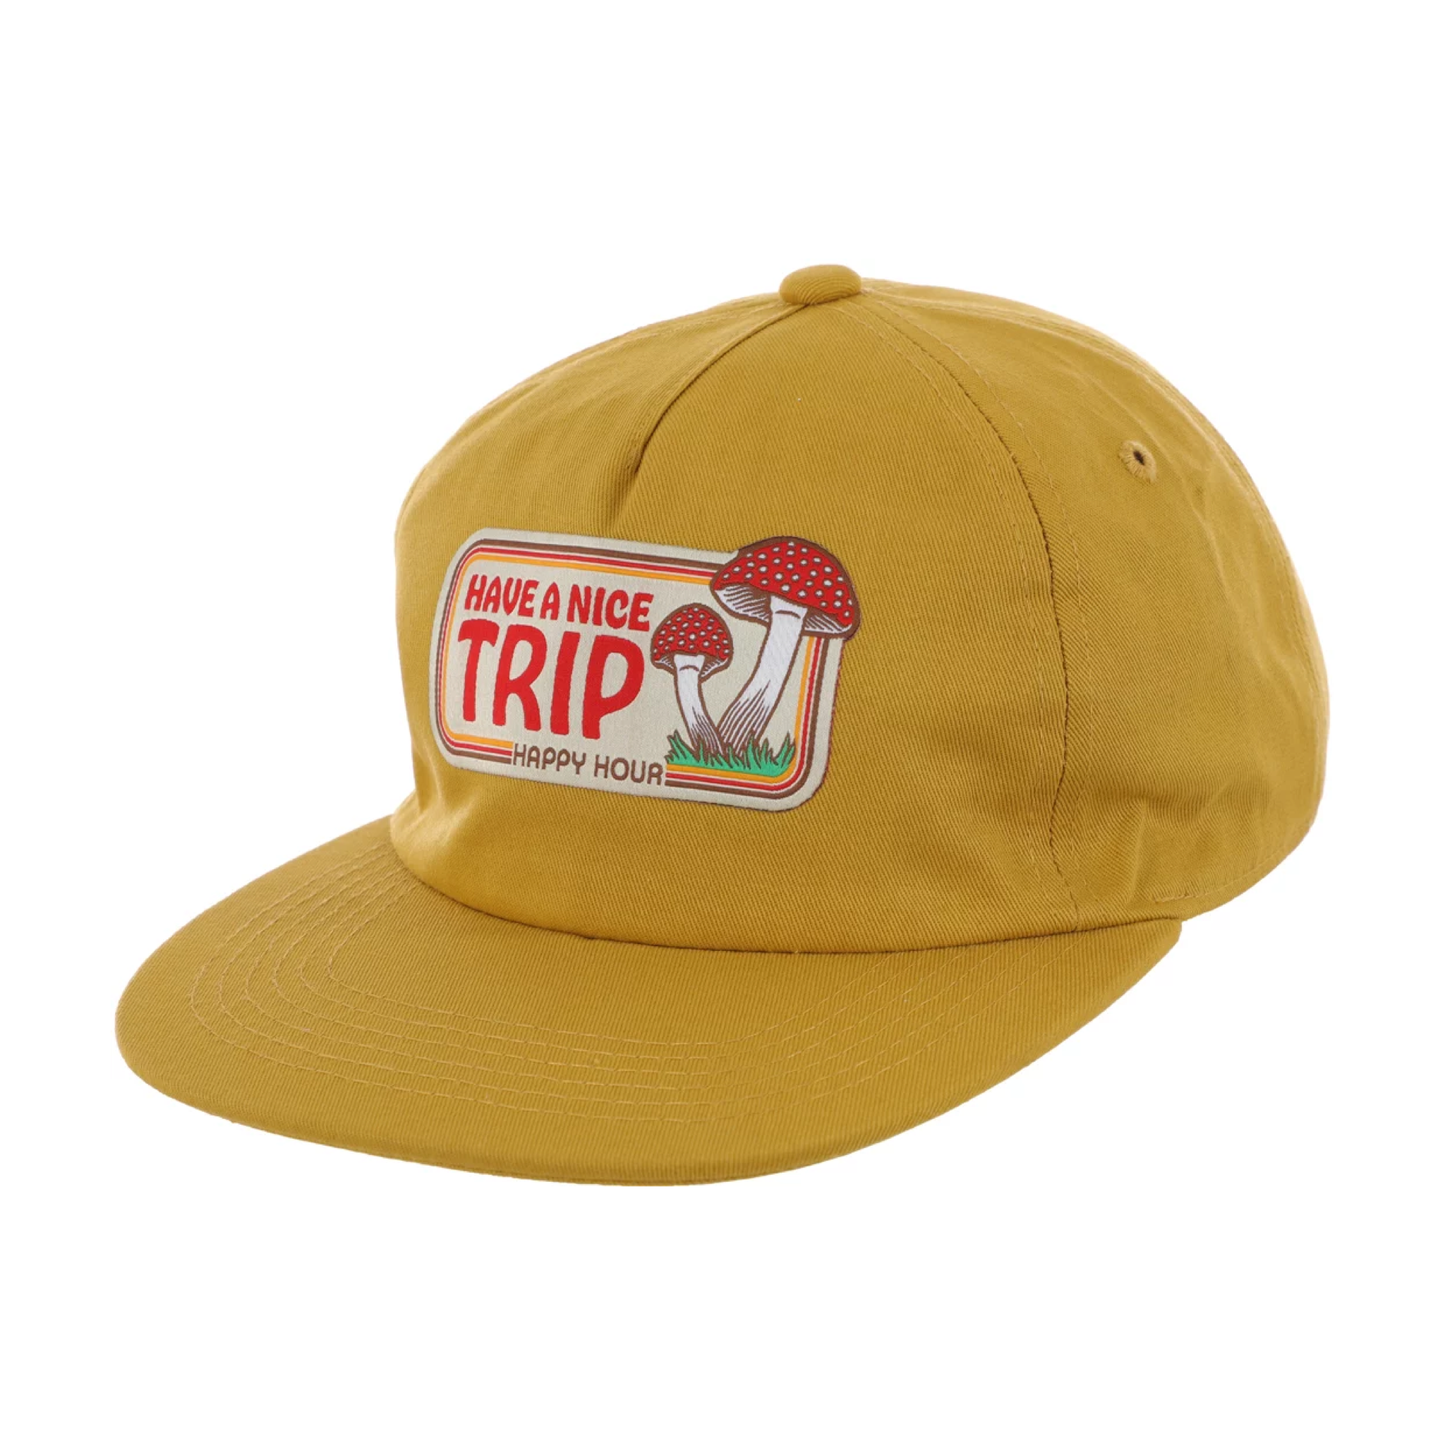 HAPPY HOUR HAVE A NICE TRIP 5 PANEL